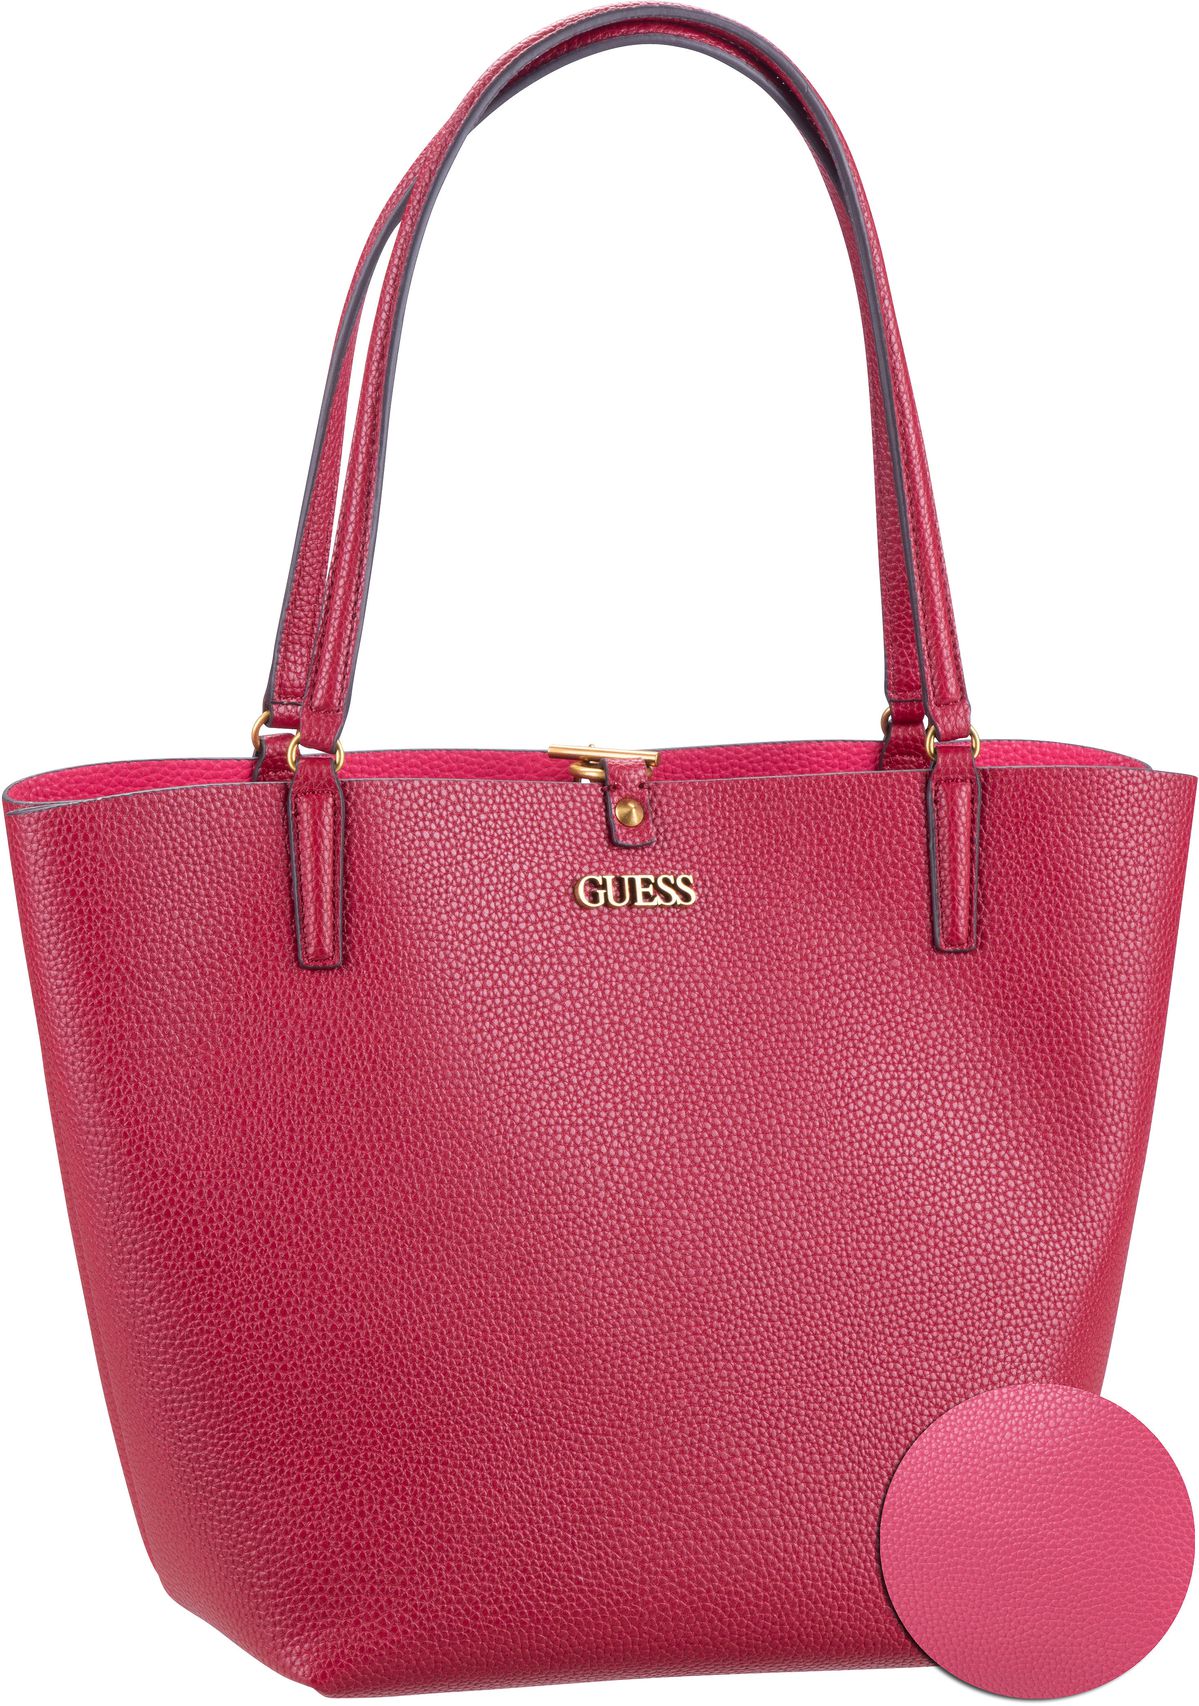 Guess Alby Toggle Tote - Beet Red/Pink